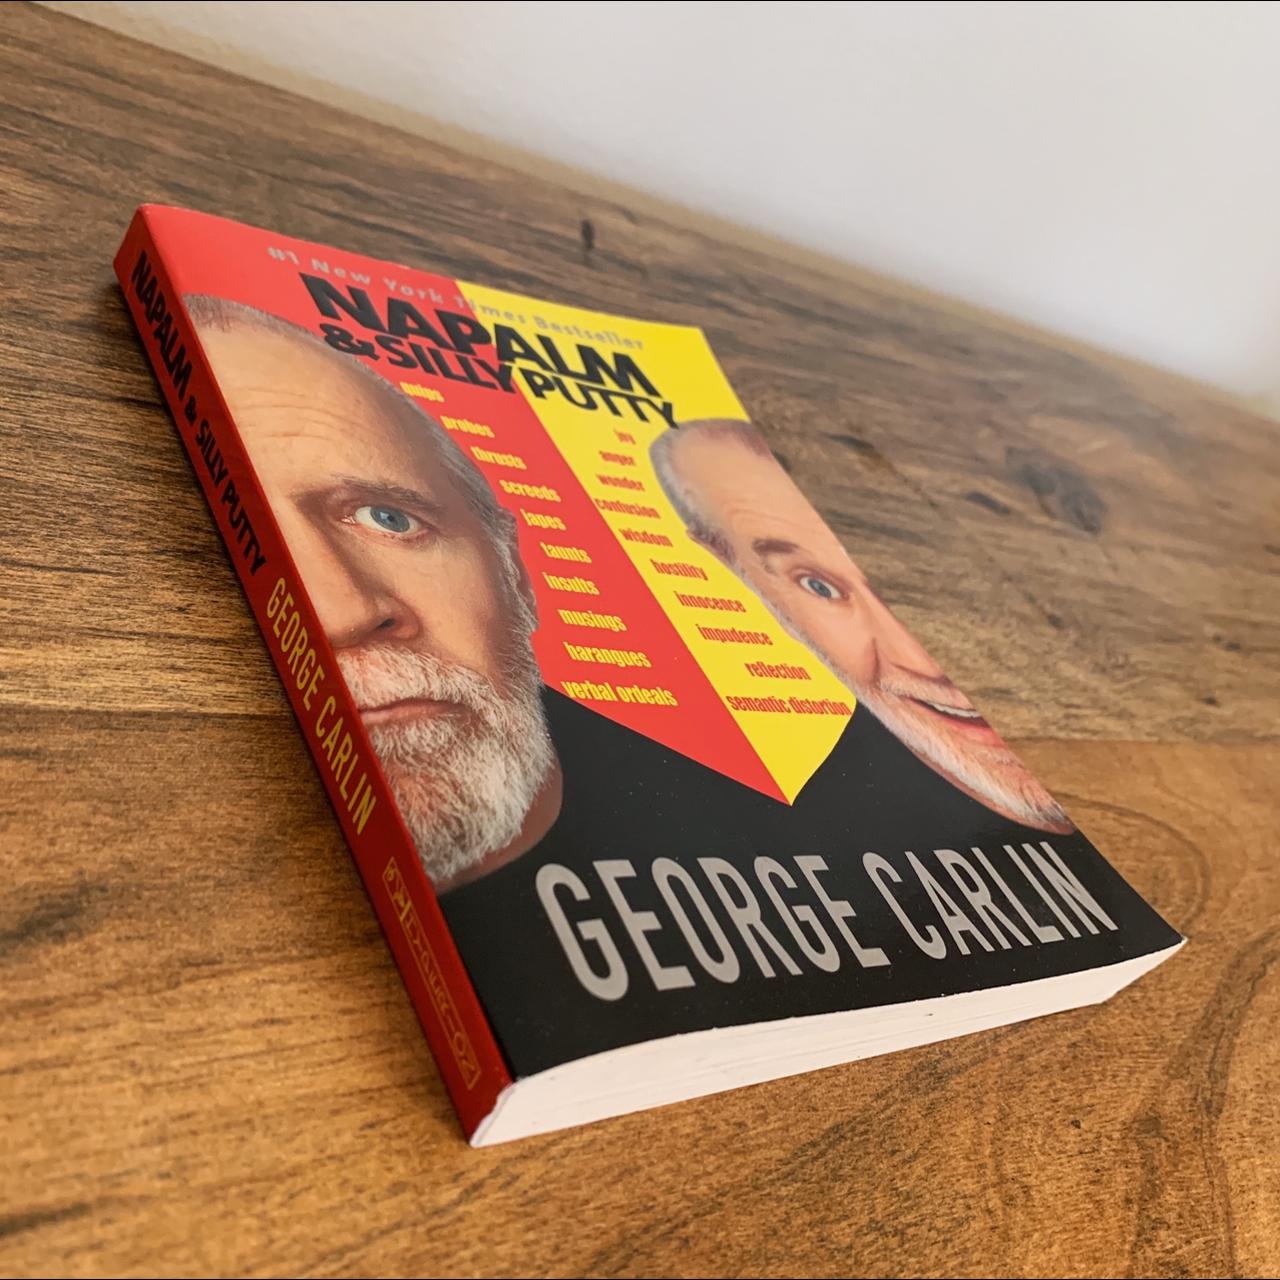 Product Image 3 - *FREE SHIPPING*

George Carlin - Napalm